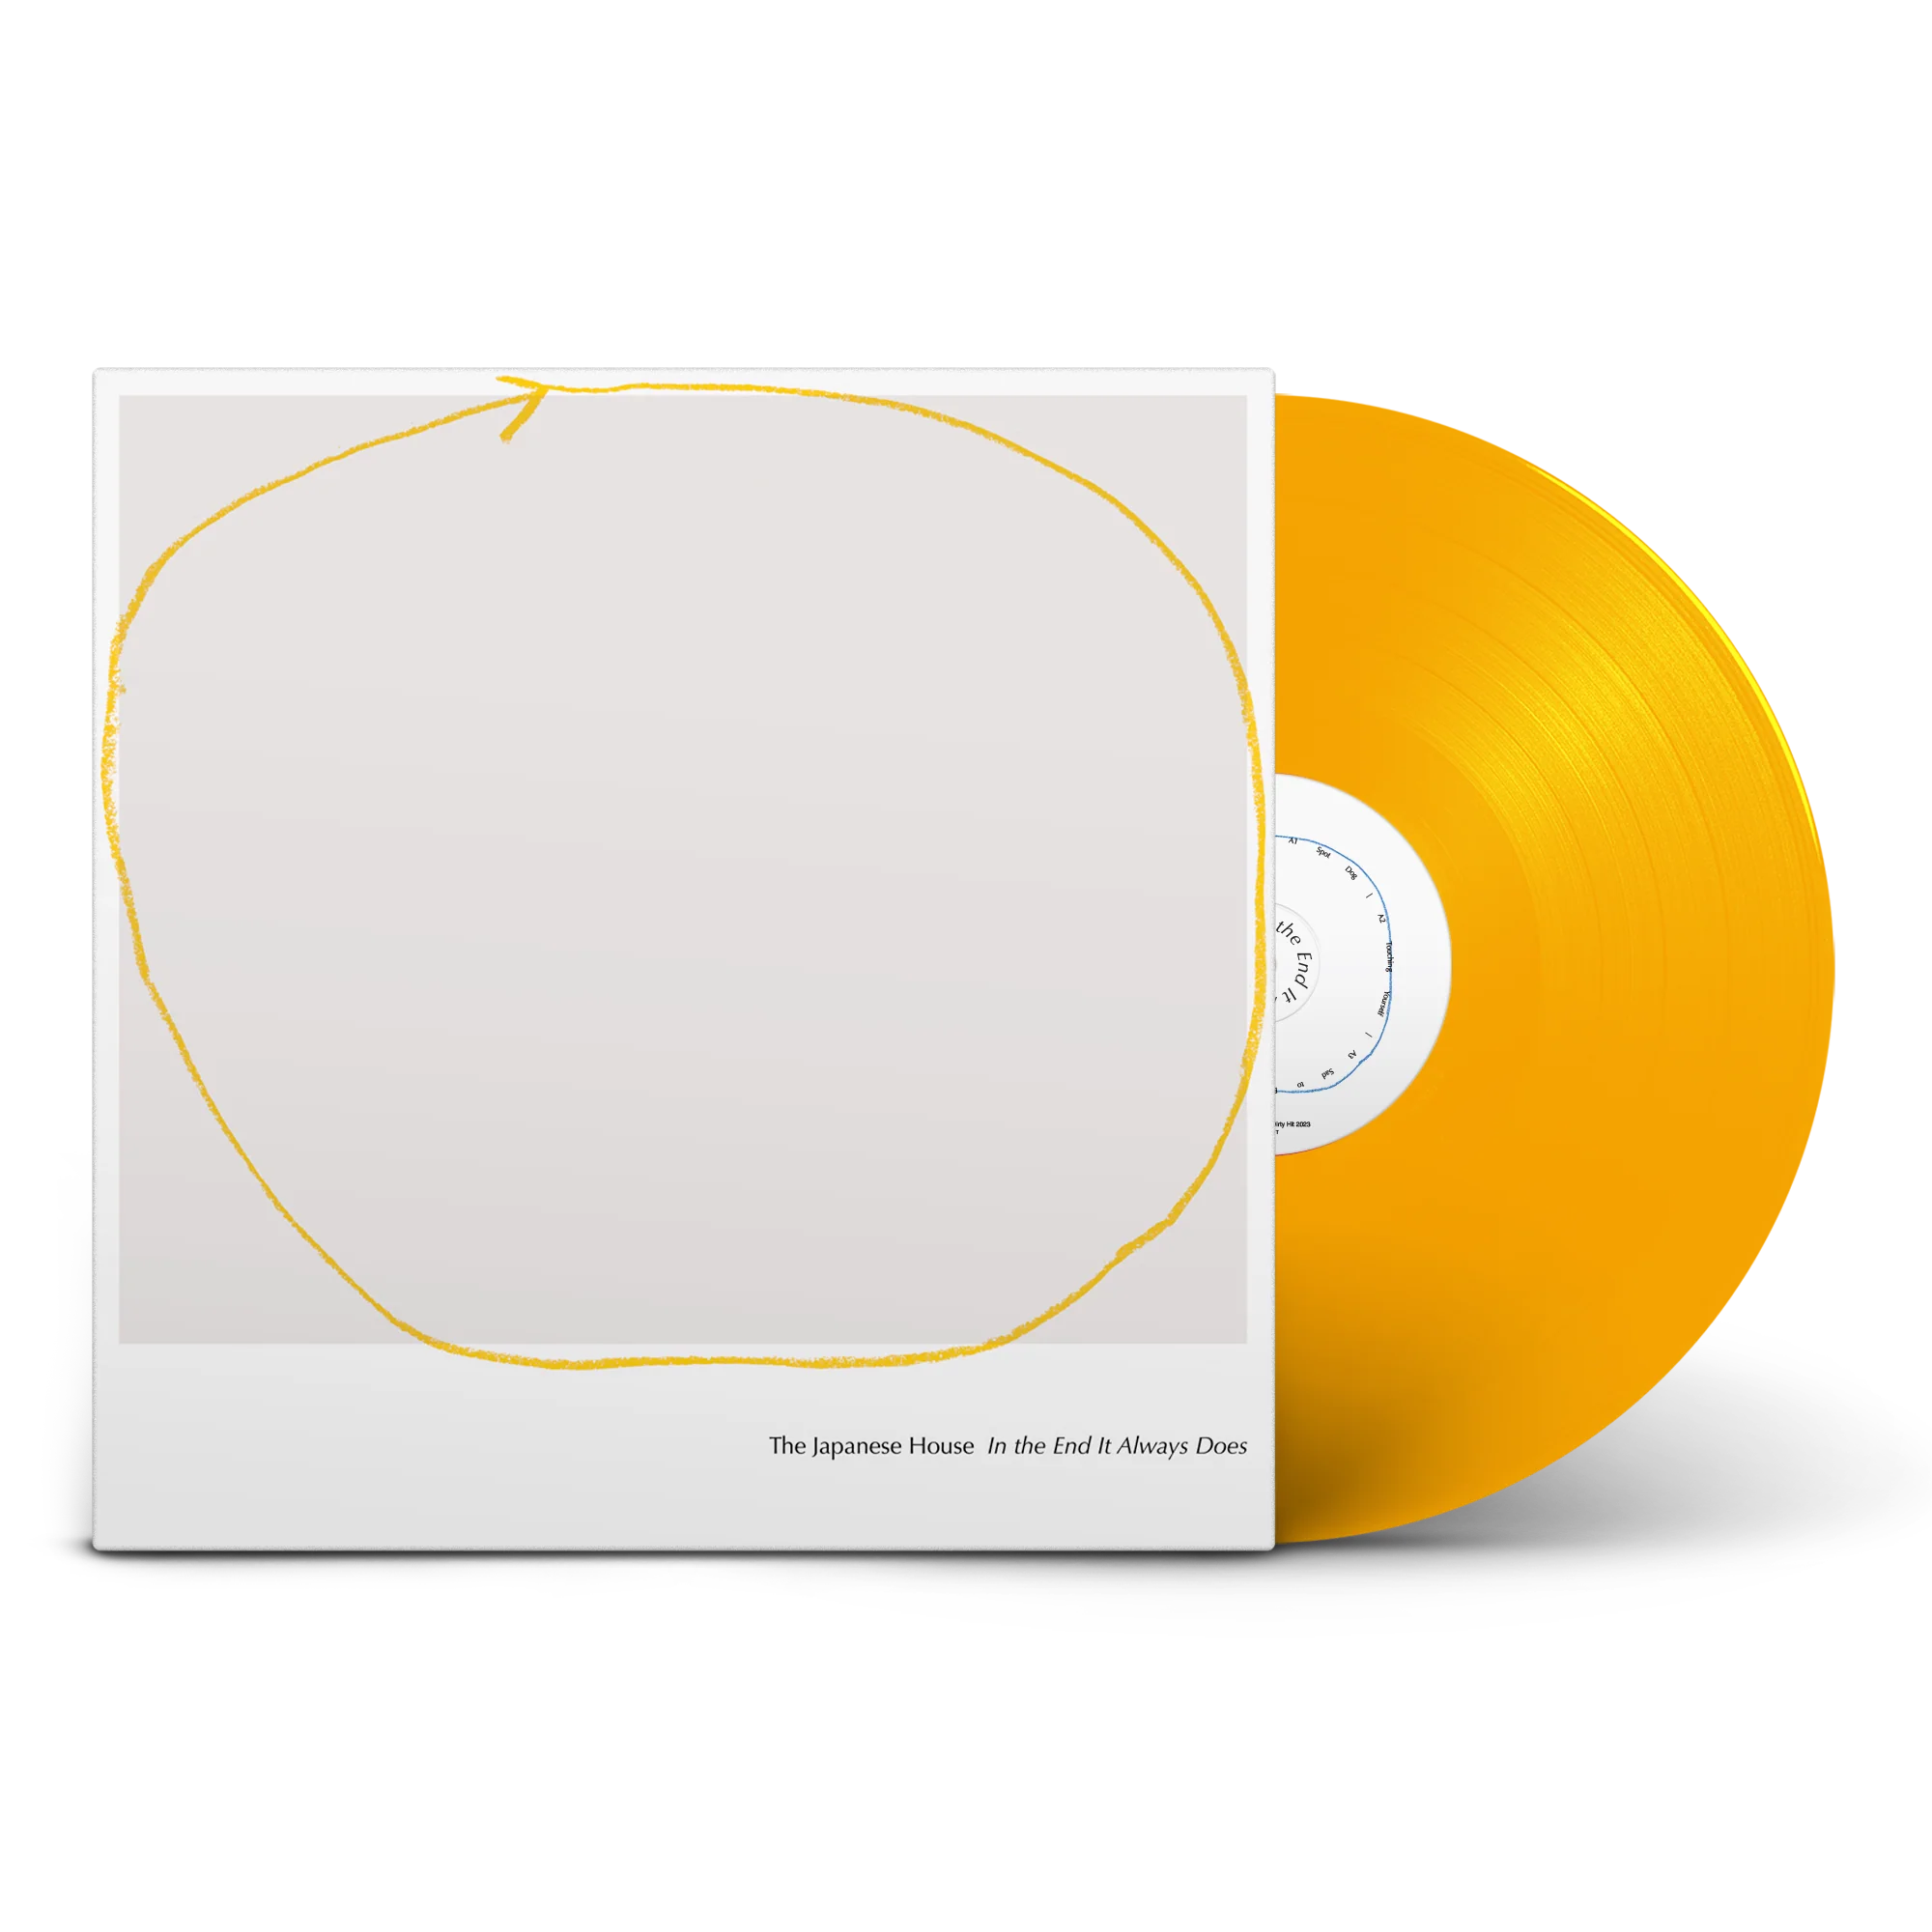 The Japanese House - In the End It Always Does: Limited Edition Sunflower Yellow Vinyl LP